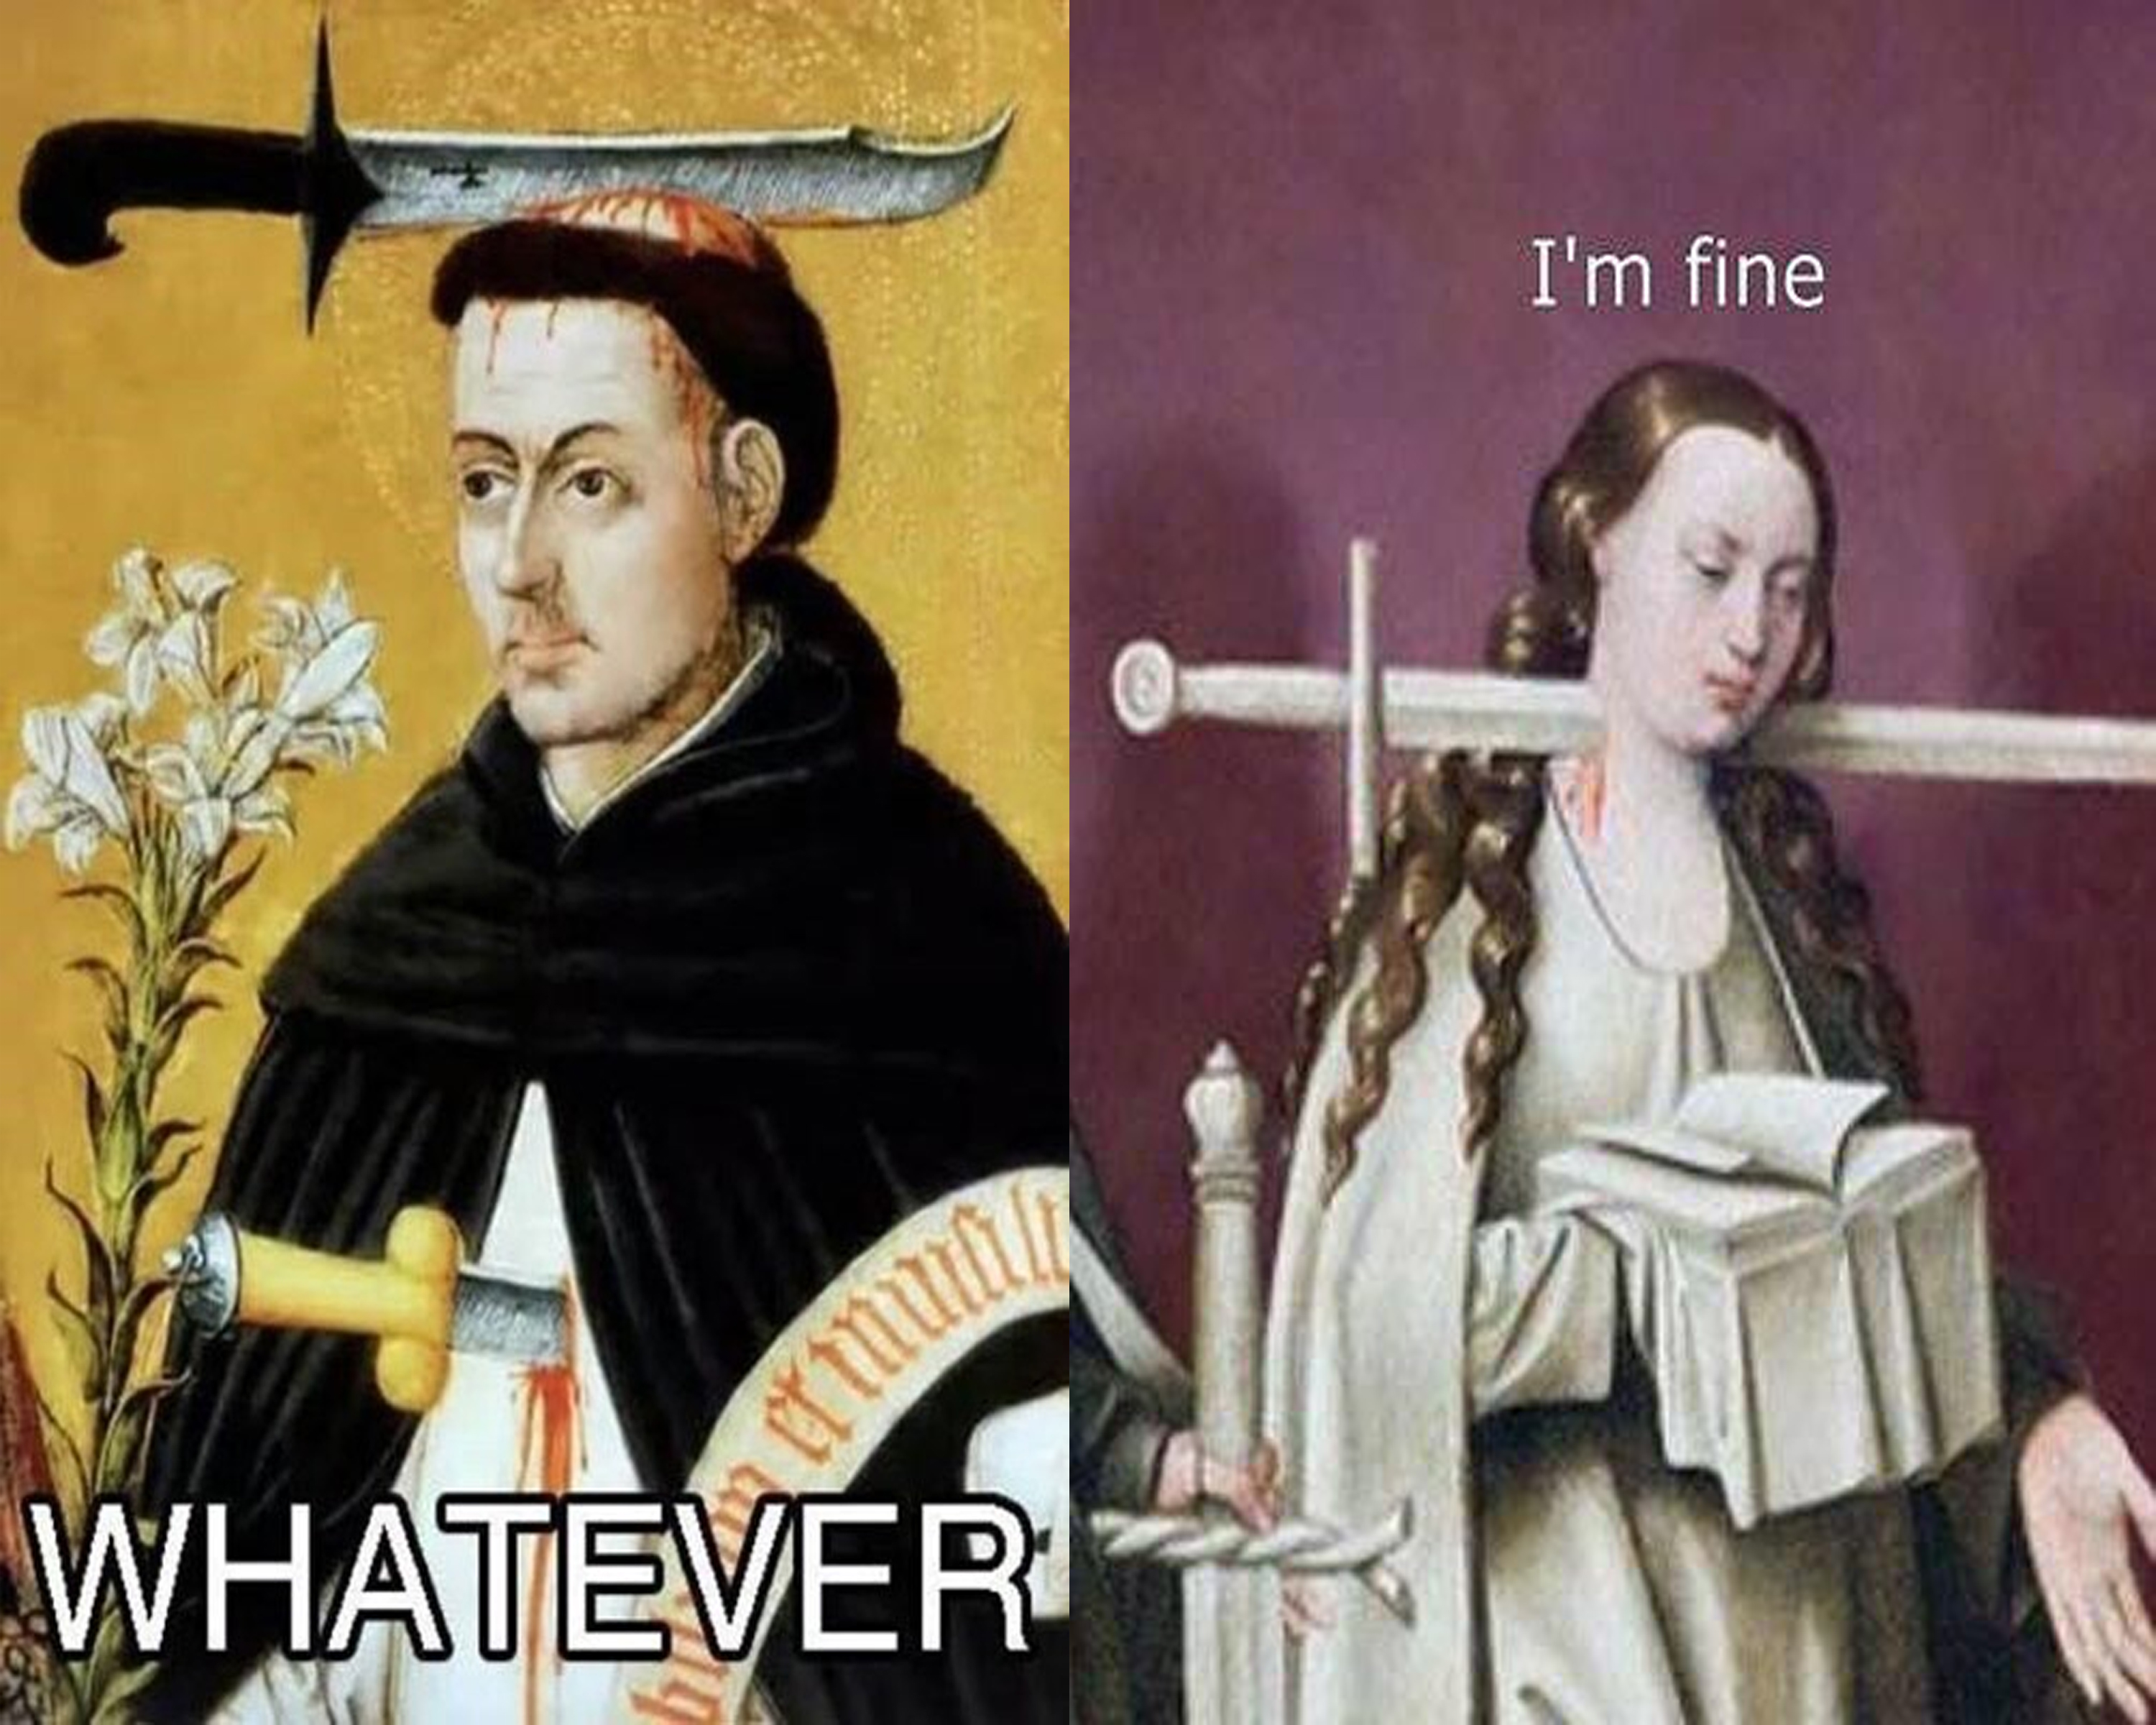 Imgs from @medievalreactions and imgur.